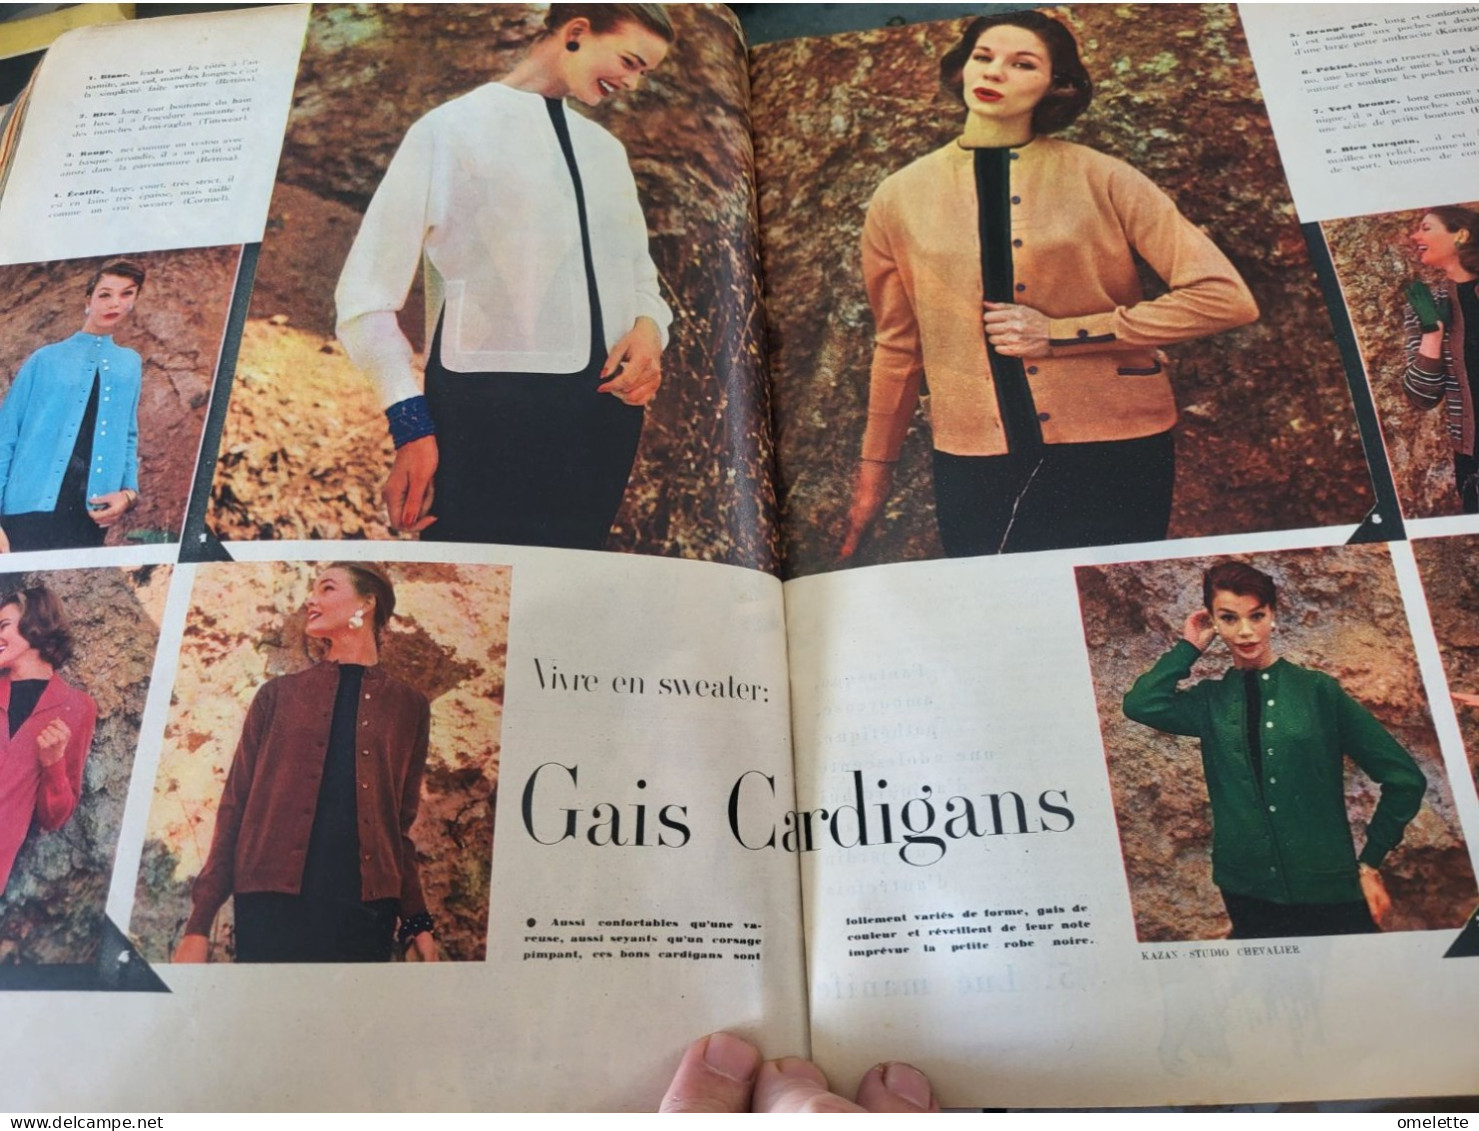 ELLE/FATH/GAINE/CESBRON/ANOUILH PERE FILLE/GRECO/ROBE SWEATER/CARDIGAN//BABAR/SAGAN/KESSEL/CHAZOT/FORMICA